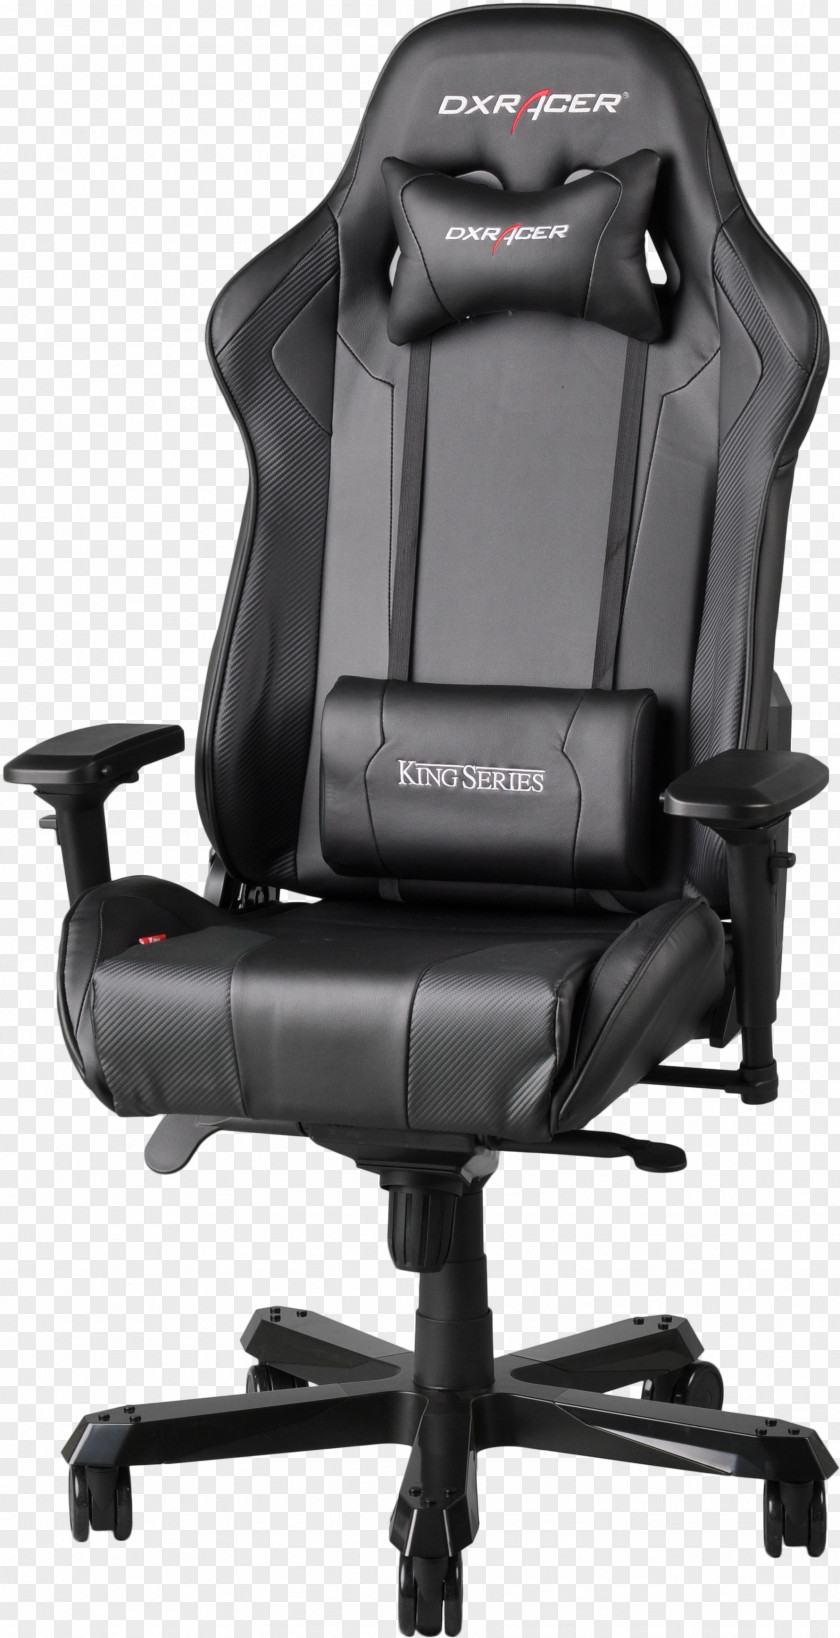 Chair Gaming Office & Desk Chairs DXRacer Video Game PNG